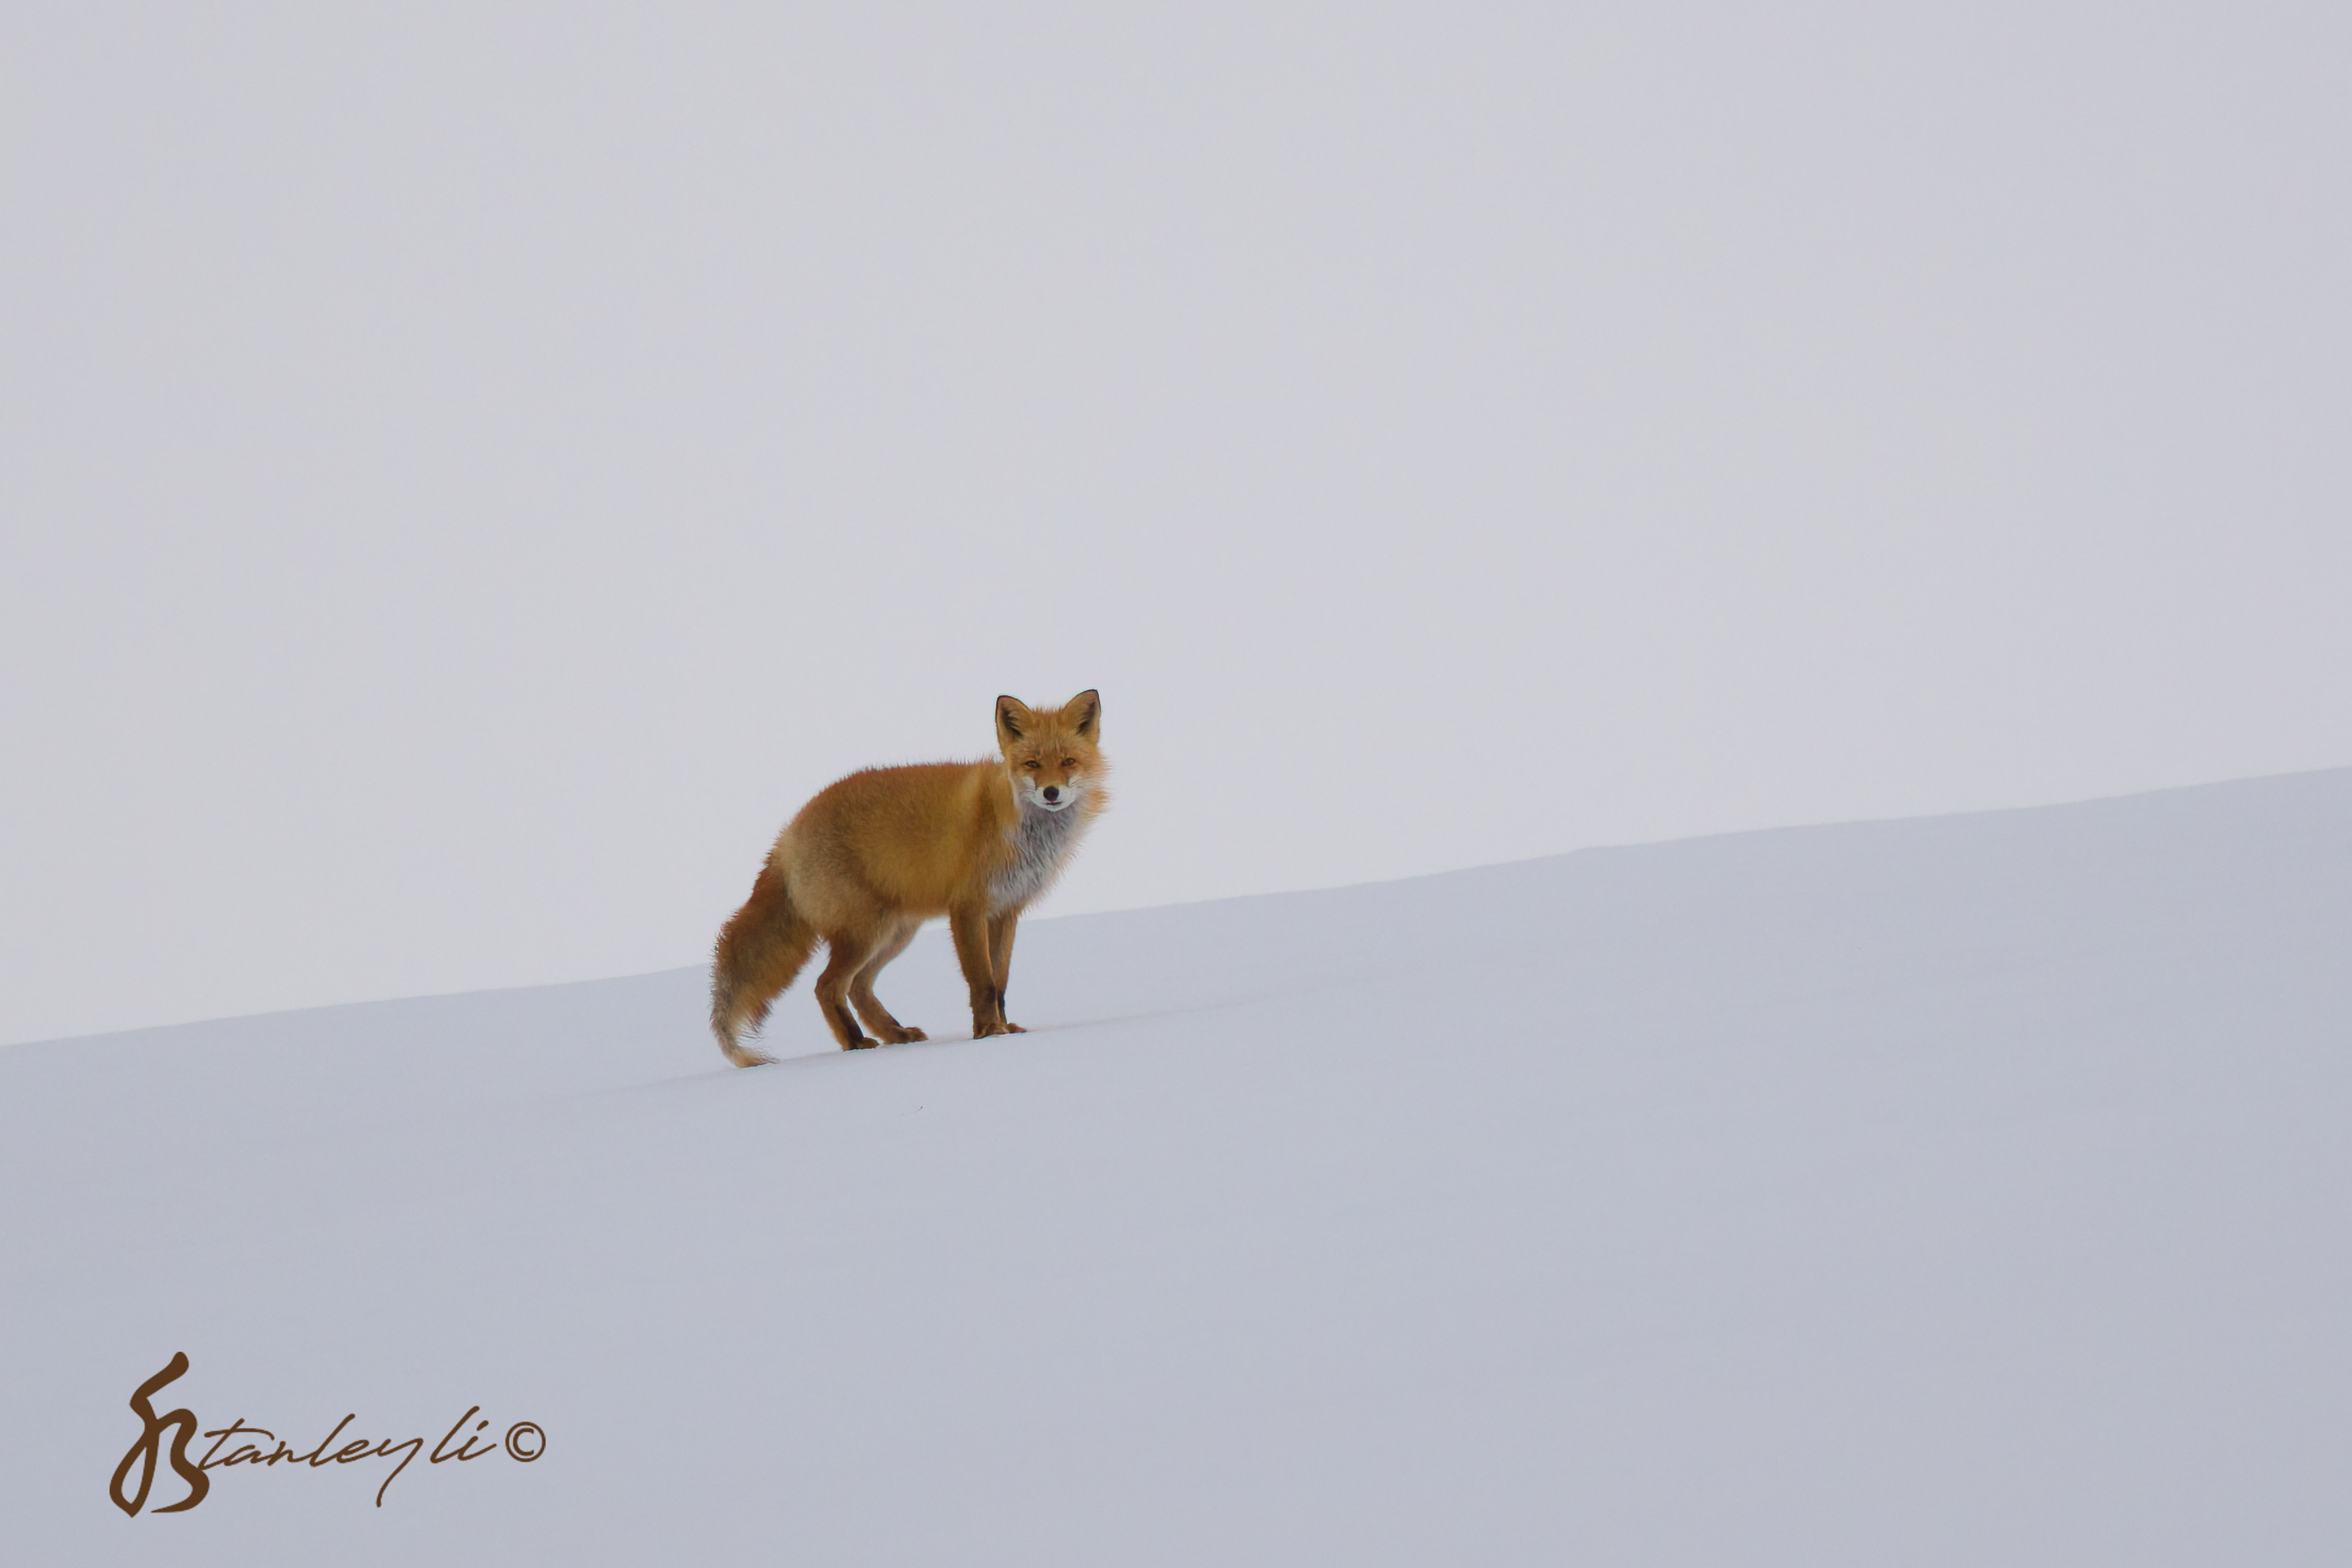 A Hokkaido red fox provides contrast in a snow covered field on a grey day. ©️ Stanley Li